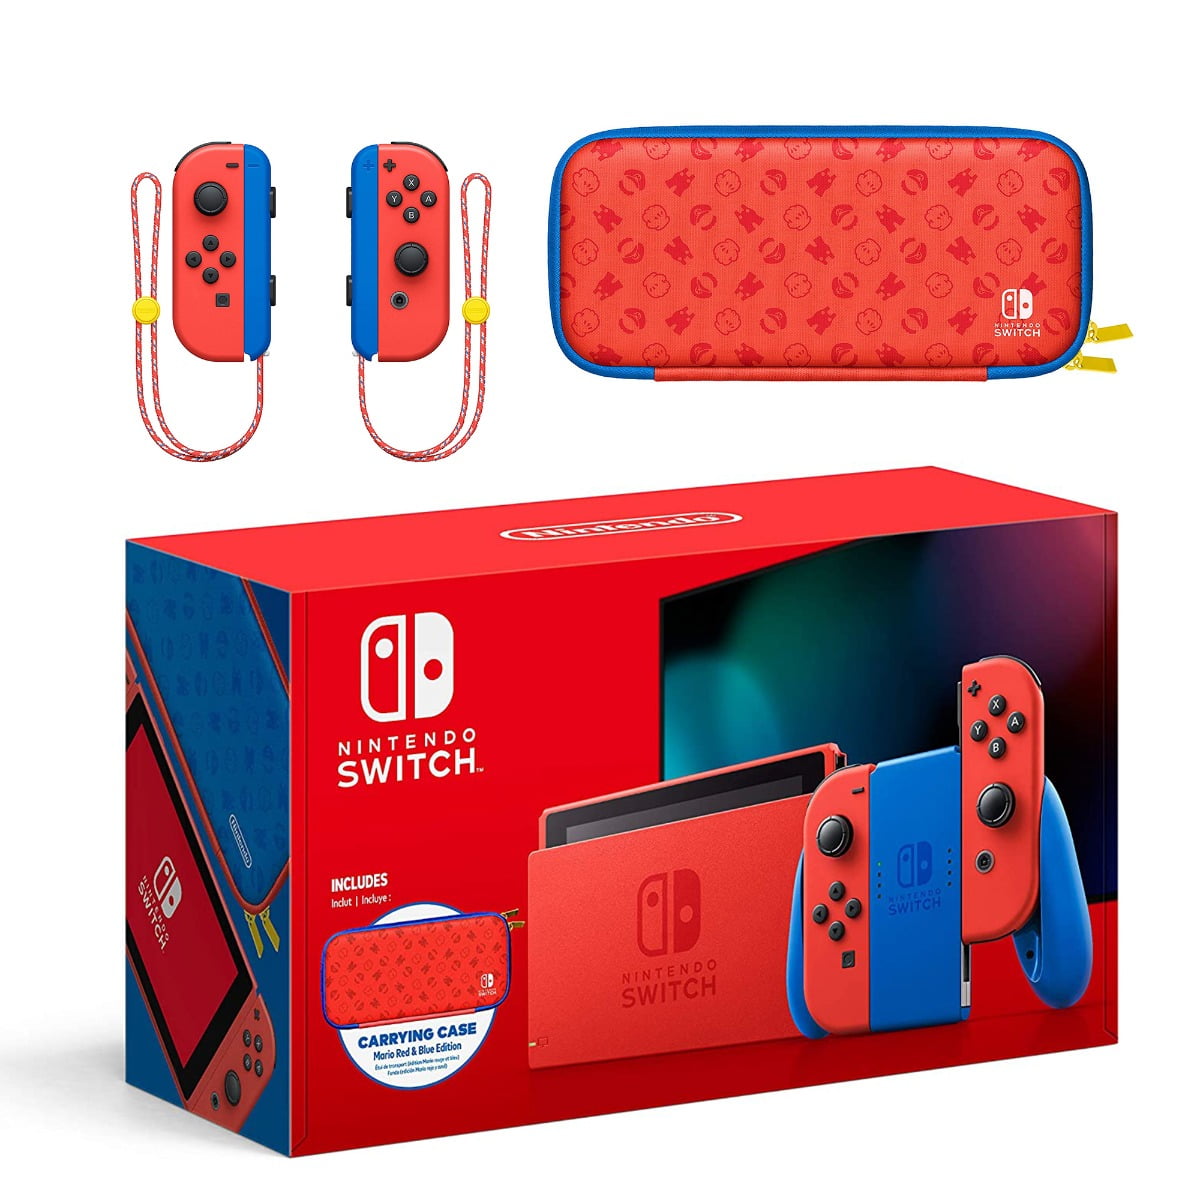 Smigre Jane Austen frihed 2021 New Nintendo Switch Mario Red & Blue Limited Edition - Featuring Mario  Red & Blue Design, Mario Iconography Carrying Case and Screen Protector -  Walmart.com